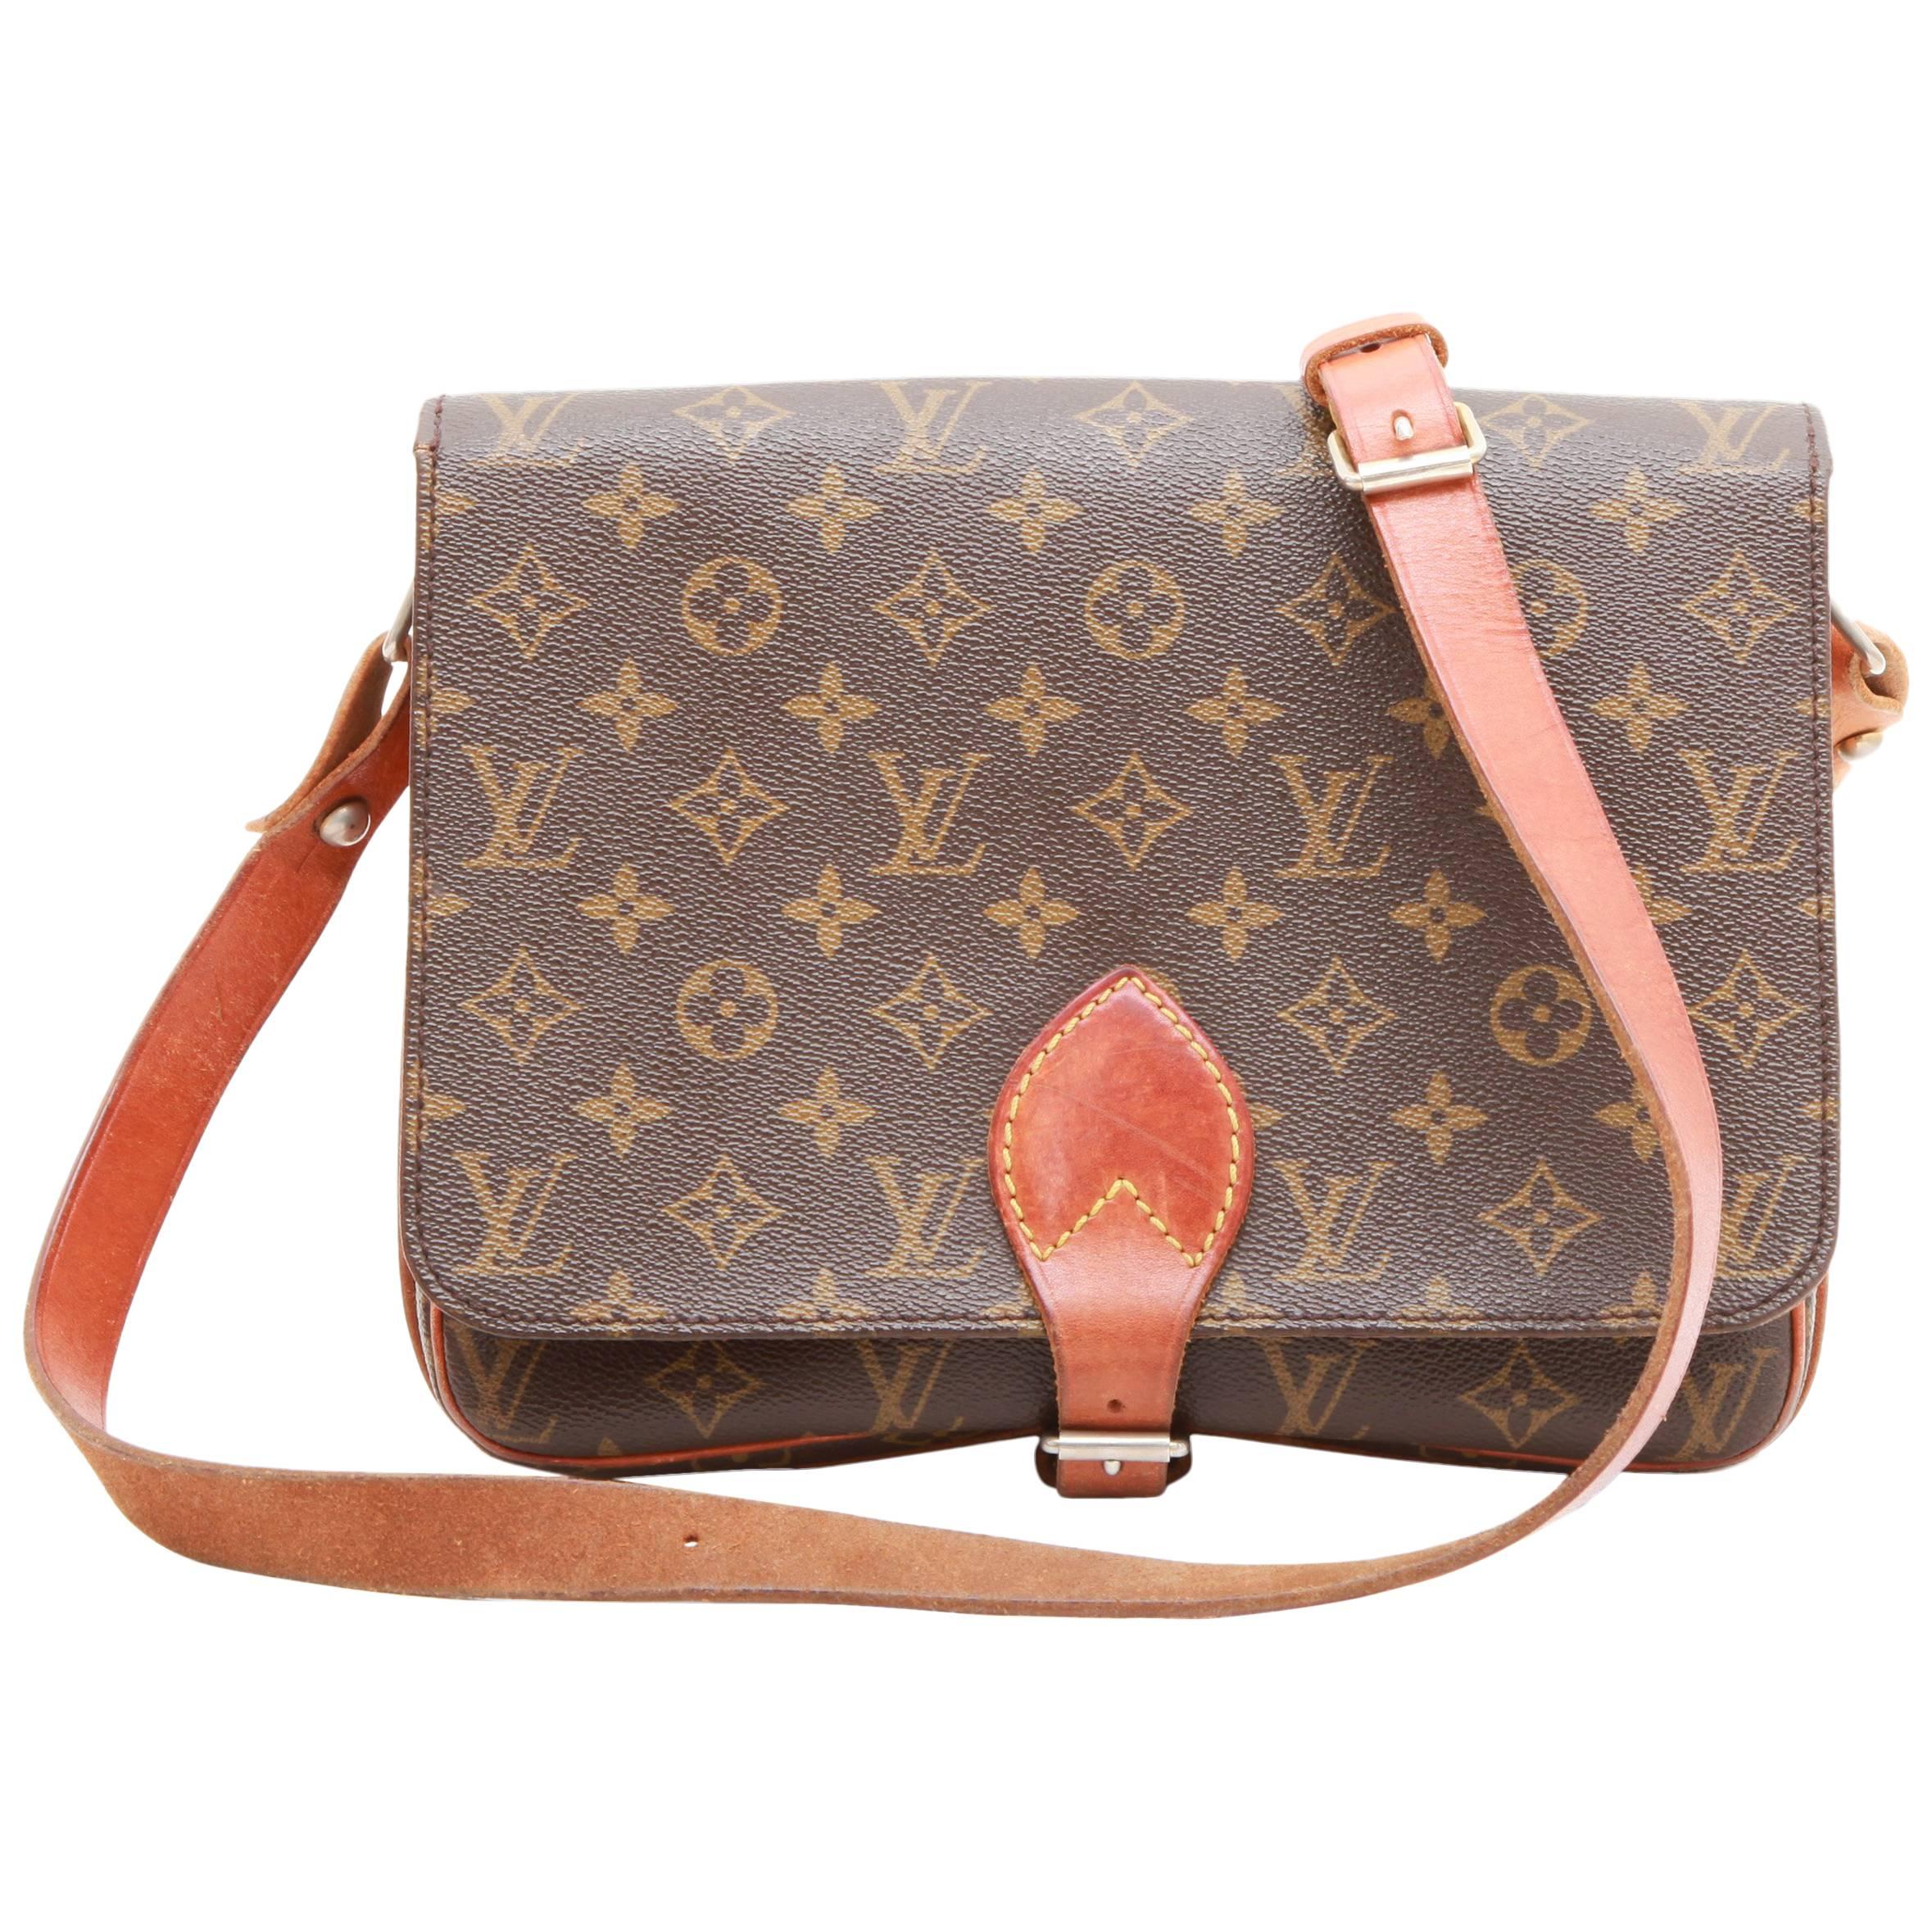 LOUIS VUITTON Messenger Bag in Brown Monogram Canvas and Natural Cowhide Leather